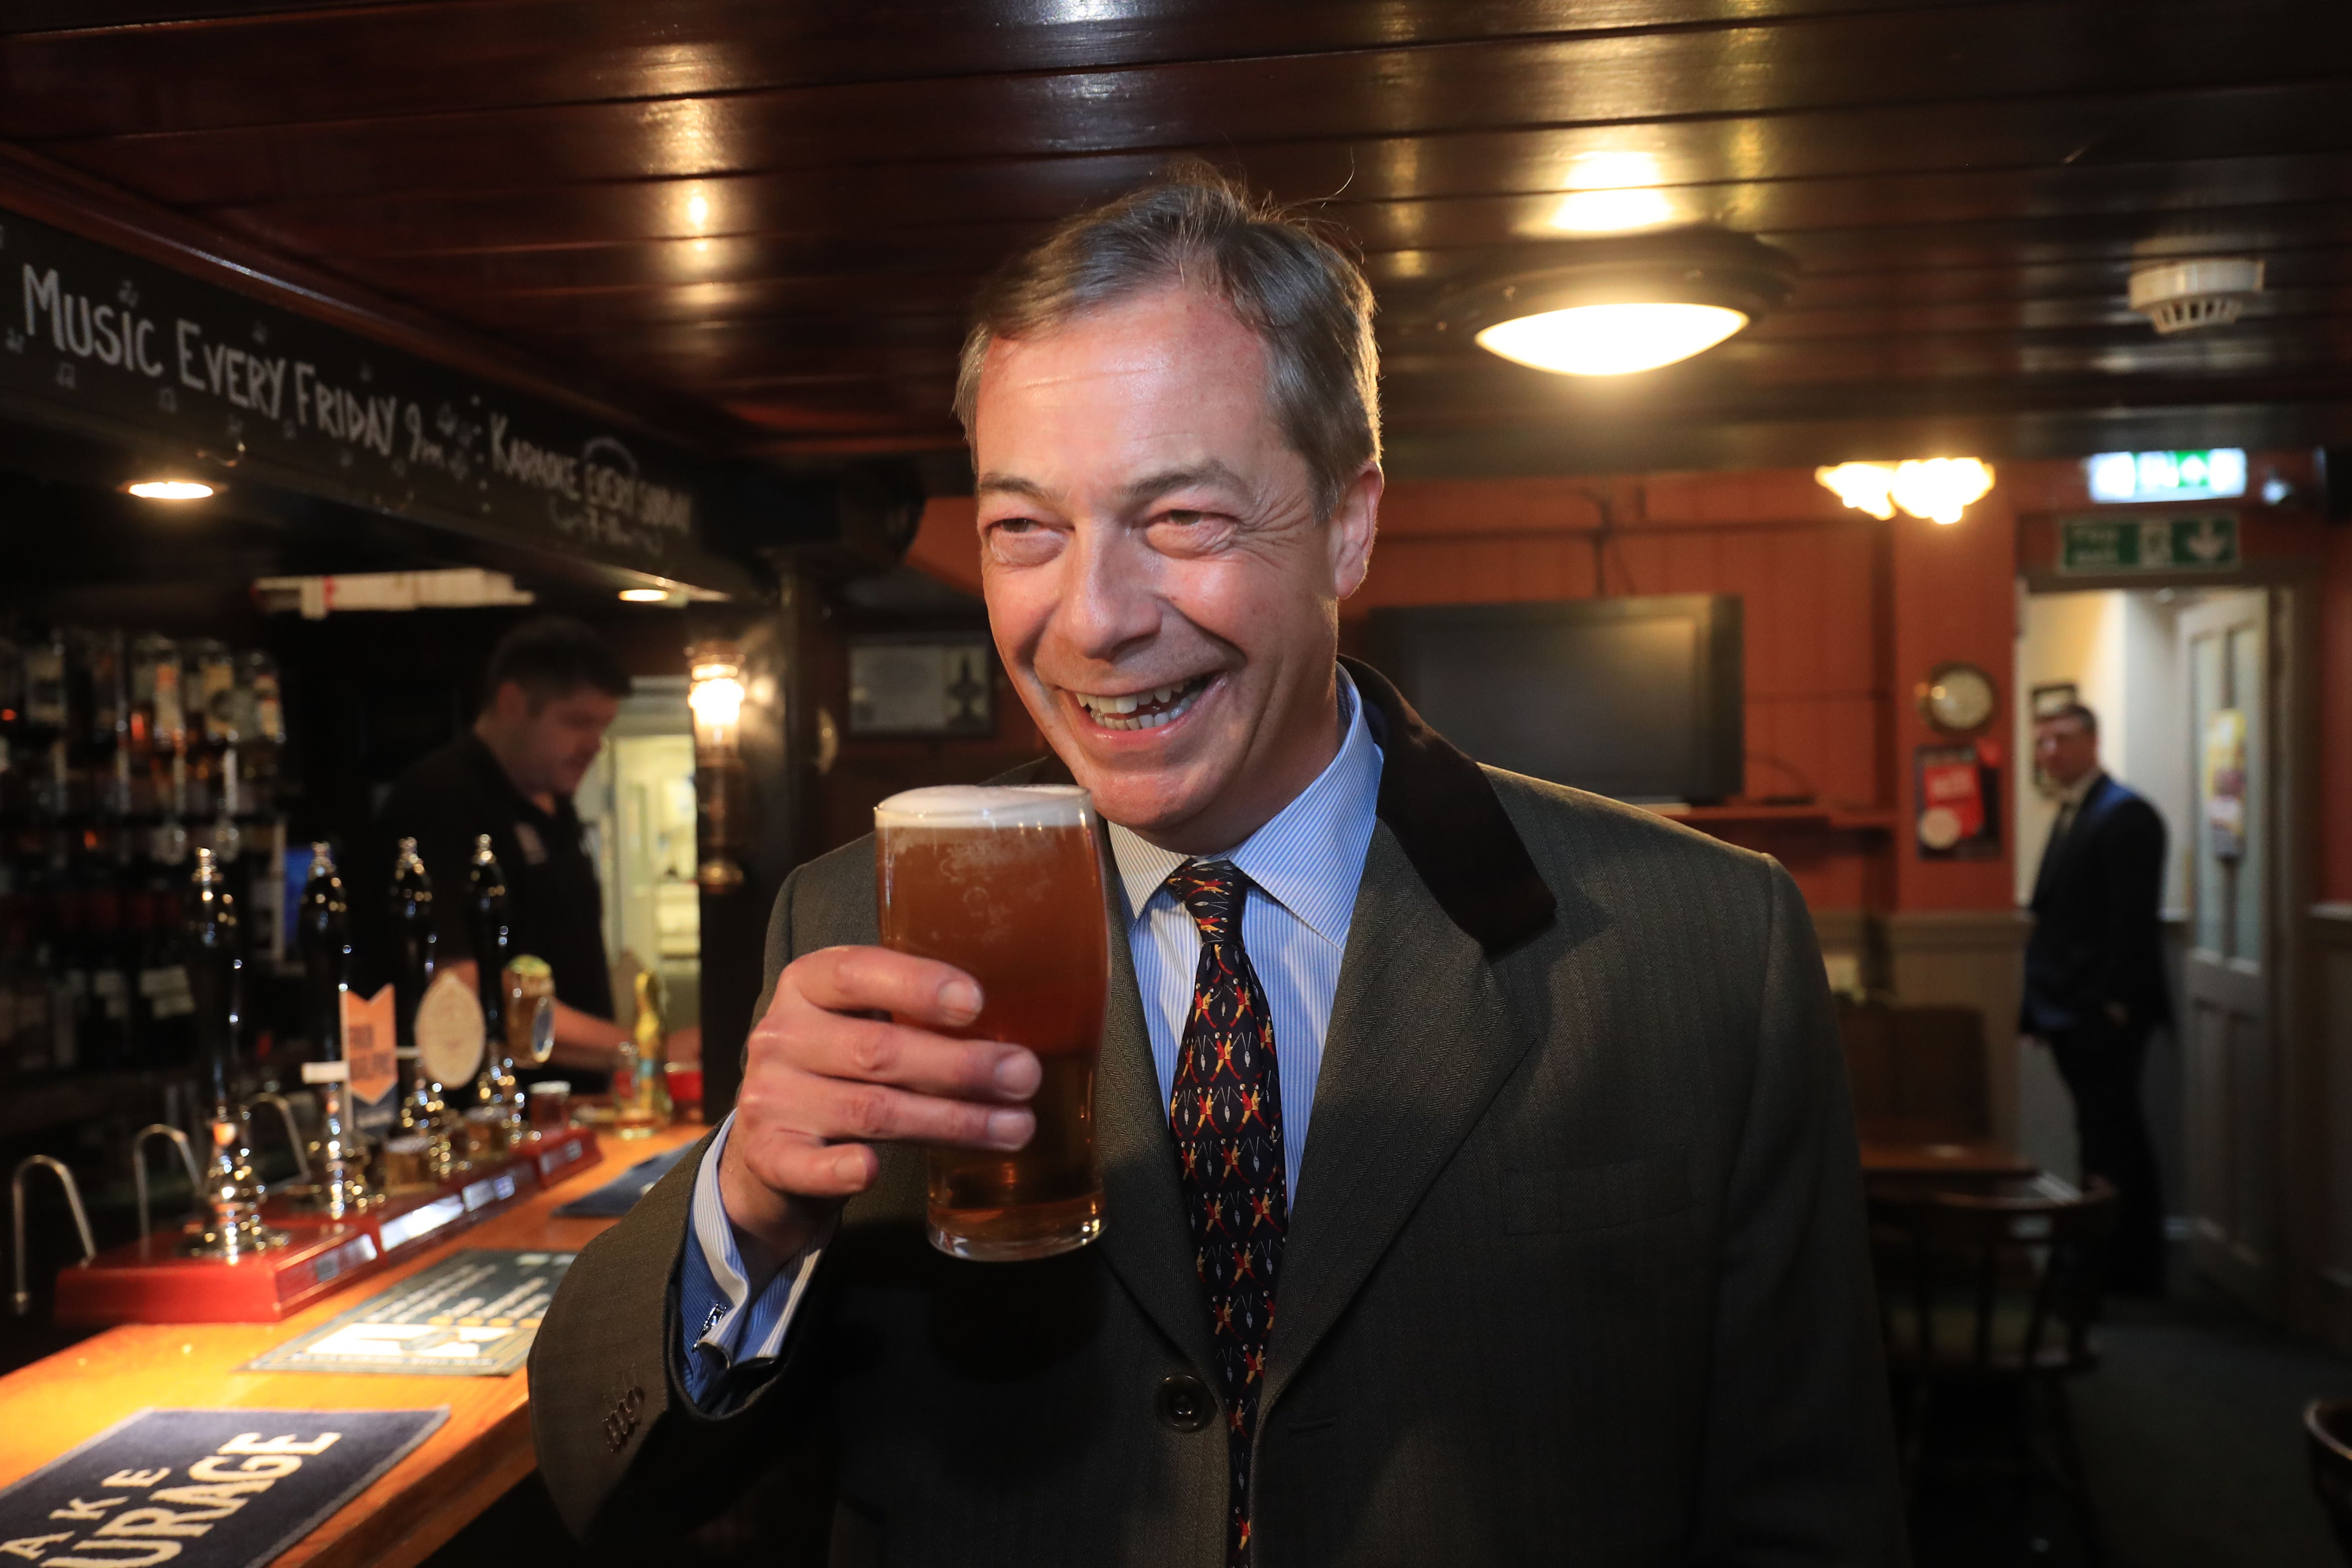 Nigel Farage said he was ‘absolutely’ planning to stand as a candidate in the general election